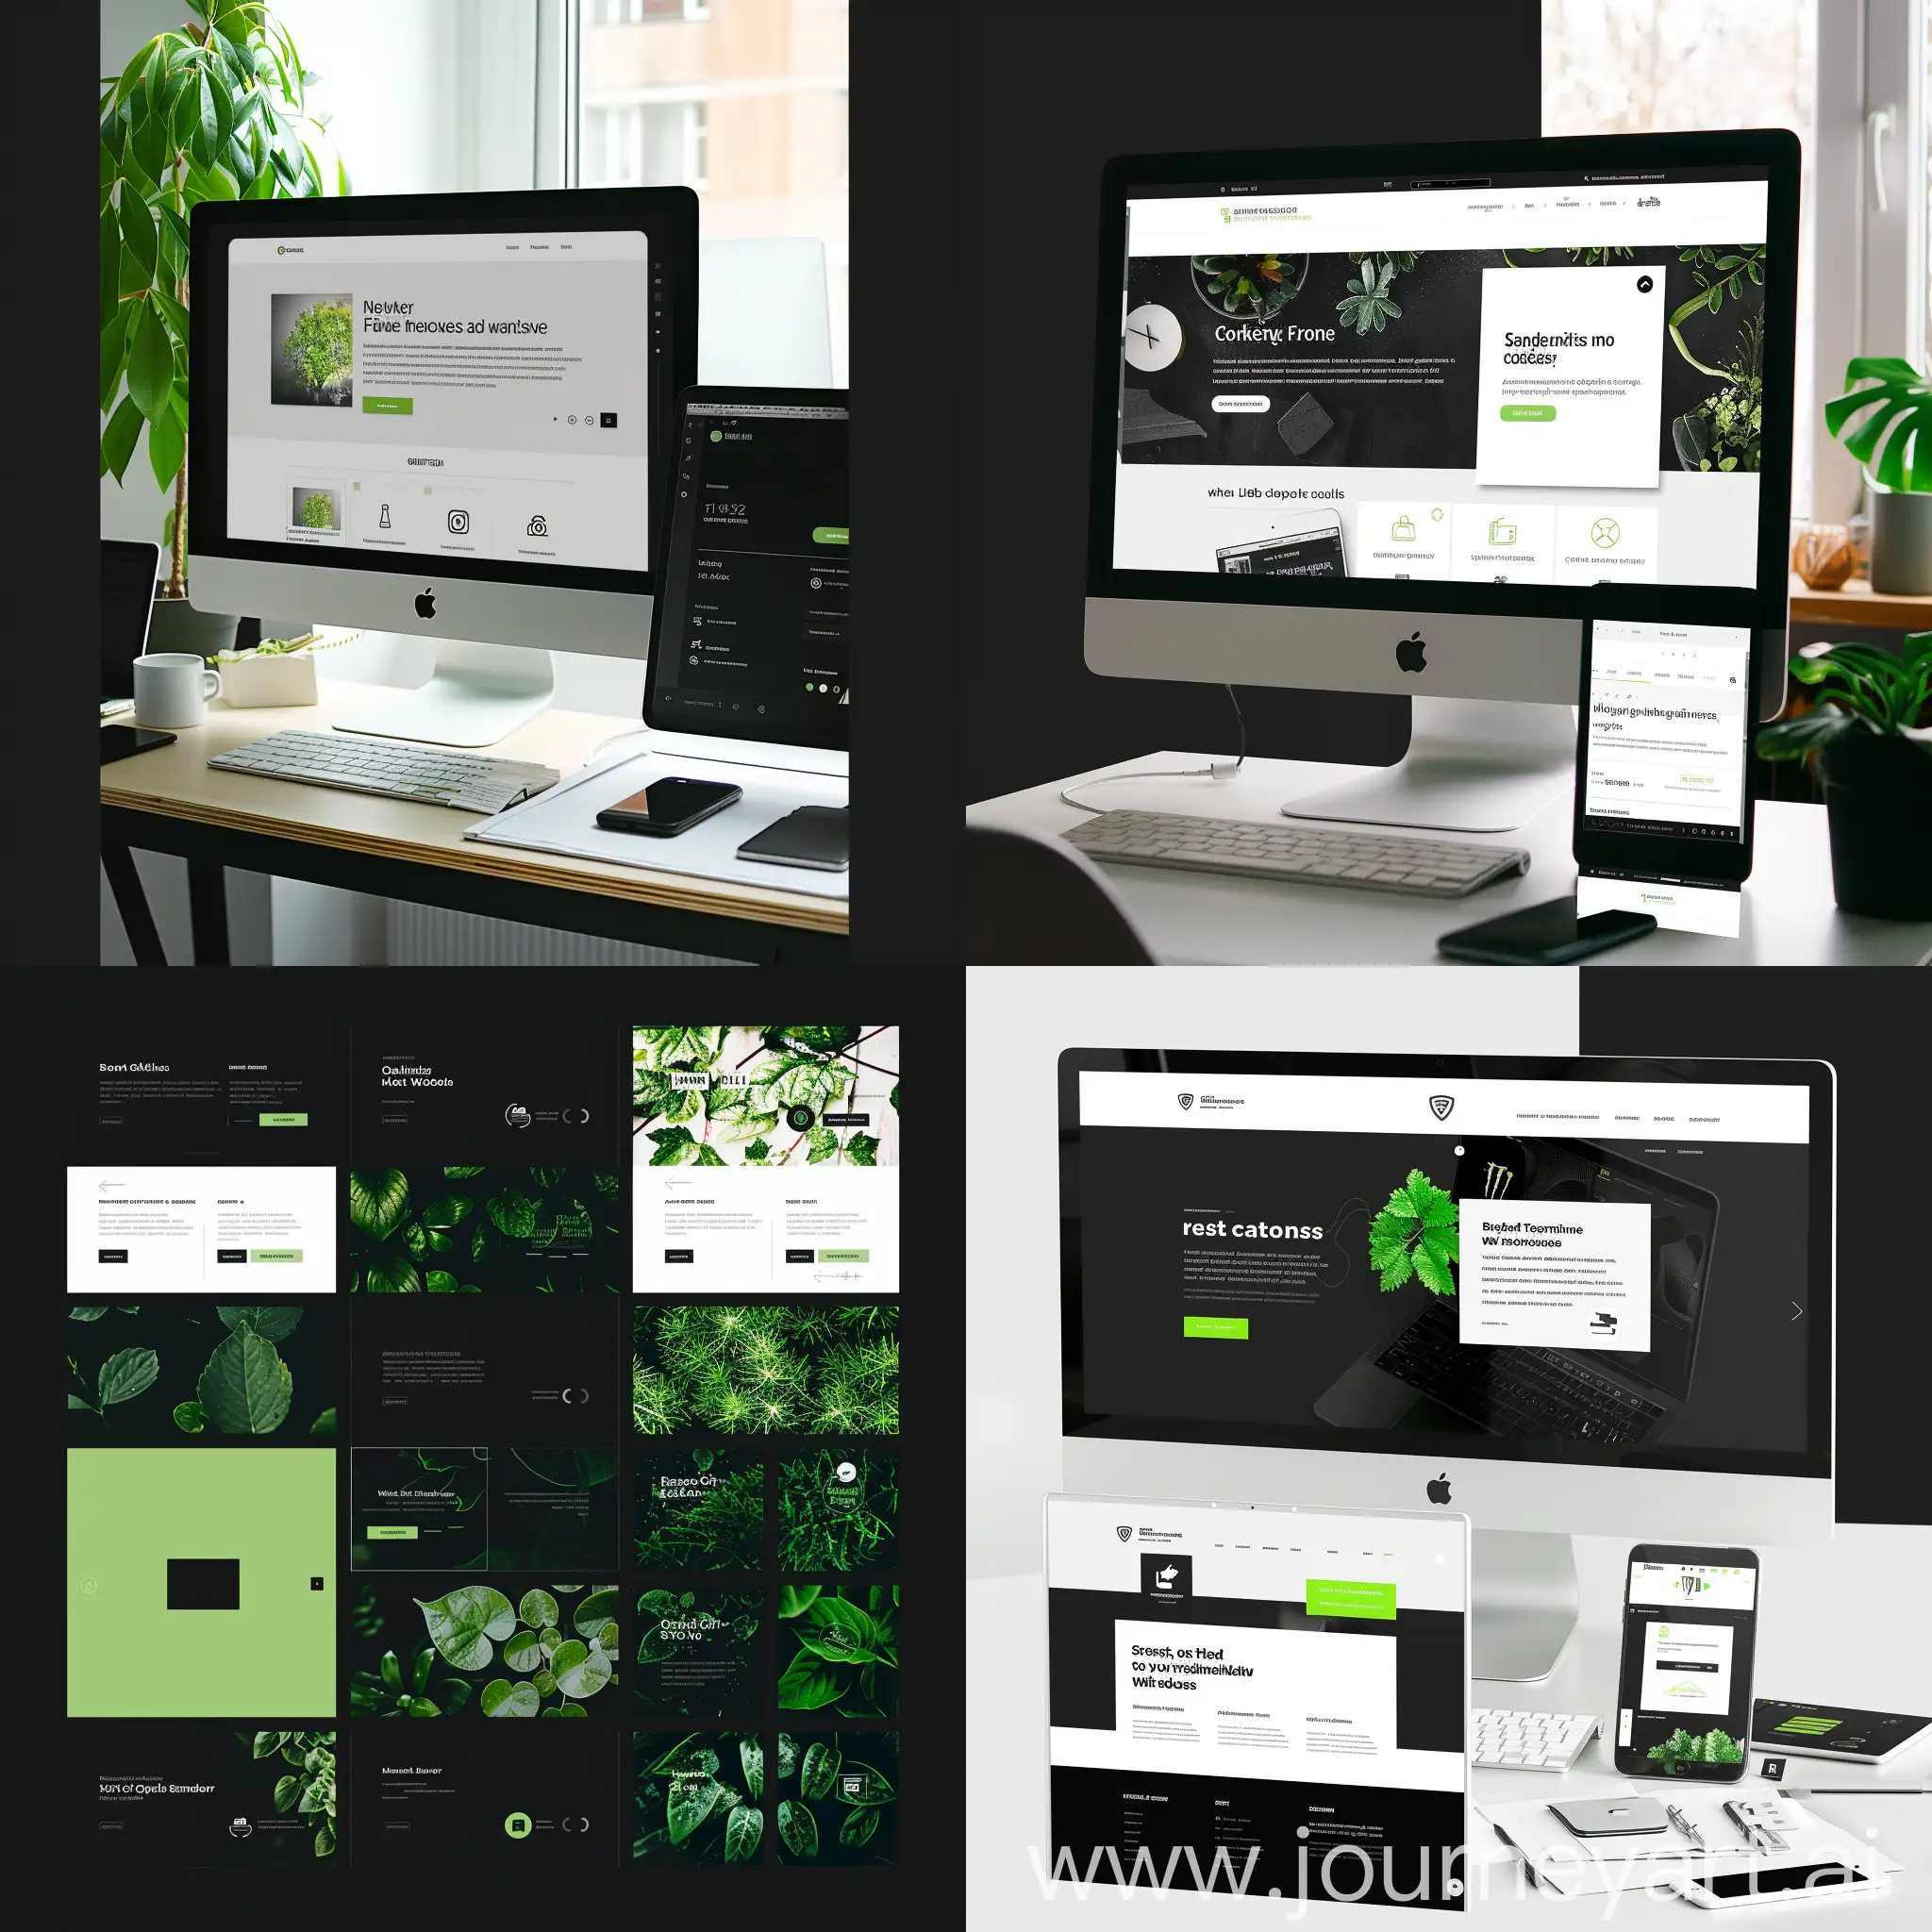 Modern-Website-Design-in-Black-White-and-Green-Colors